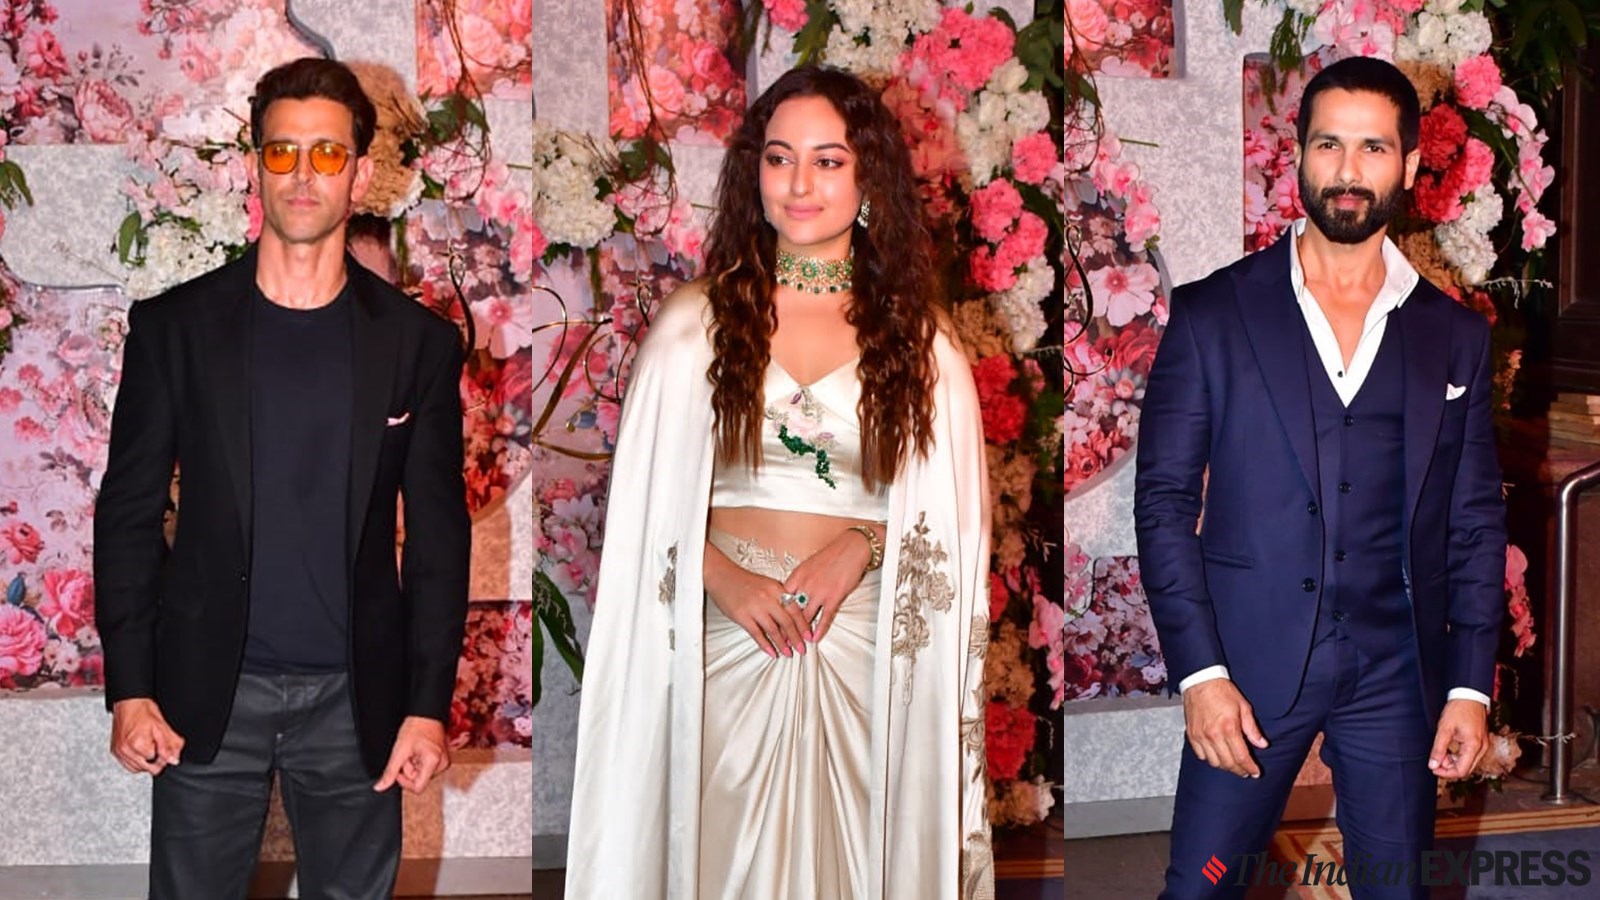 Sonakshi Sinha X Video Hd - Bollywood stars Hrithik Roshan, Sonakshi Sinha, Shahid Kapoor and others,  attend reception party in glam avatars | Fashion News - The Indian Express